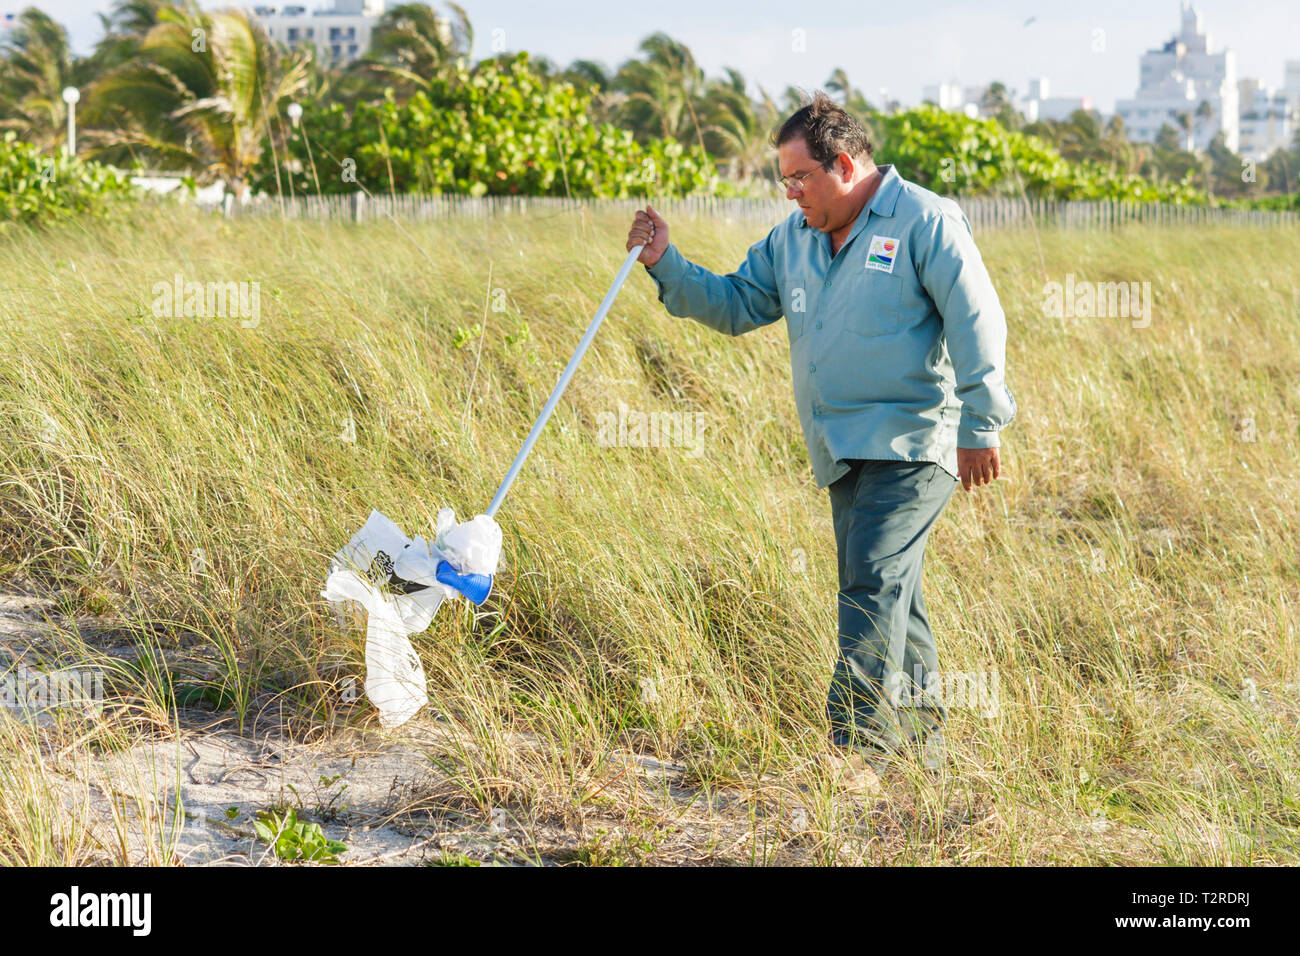 Miami Beach Florida,city worker,workers,Hispanic man men male,clean up,pick up,trash,plastic cup,paper,pollution,grass,artificial dune,FL090430079 Stock Photo